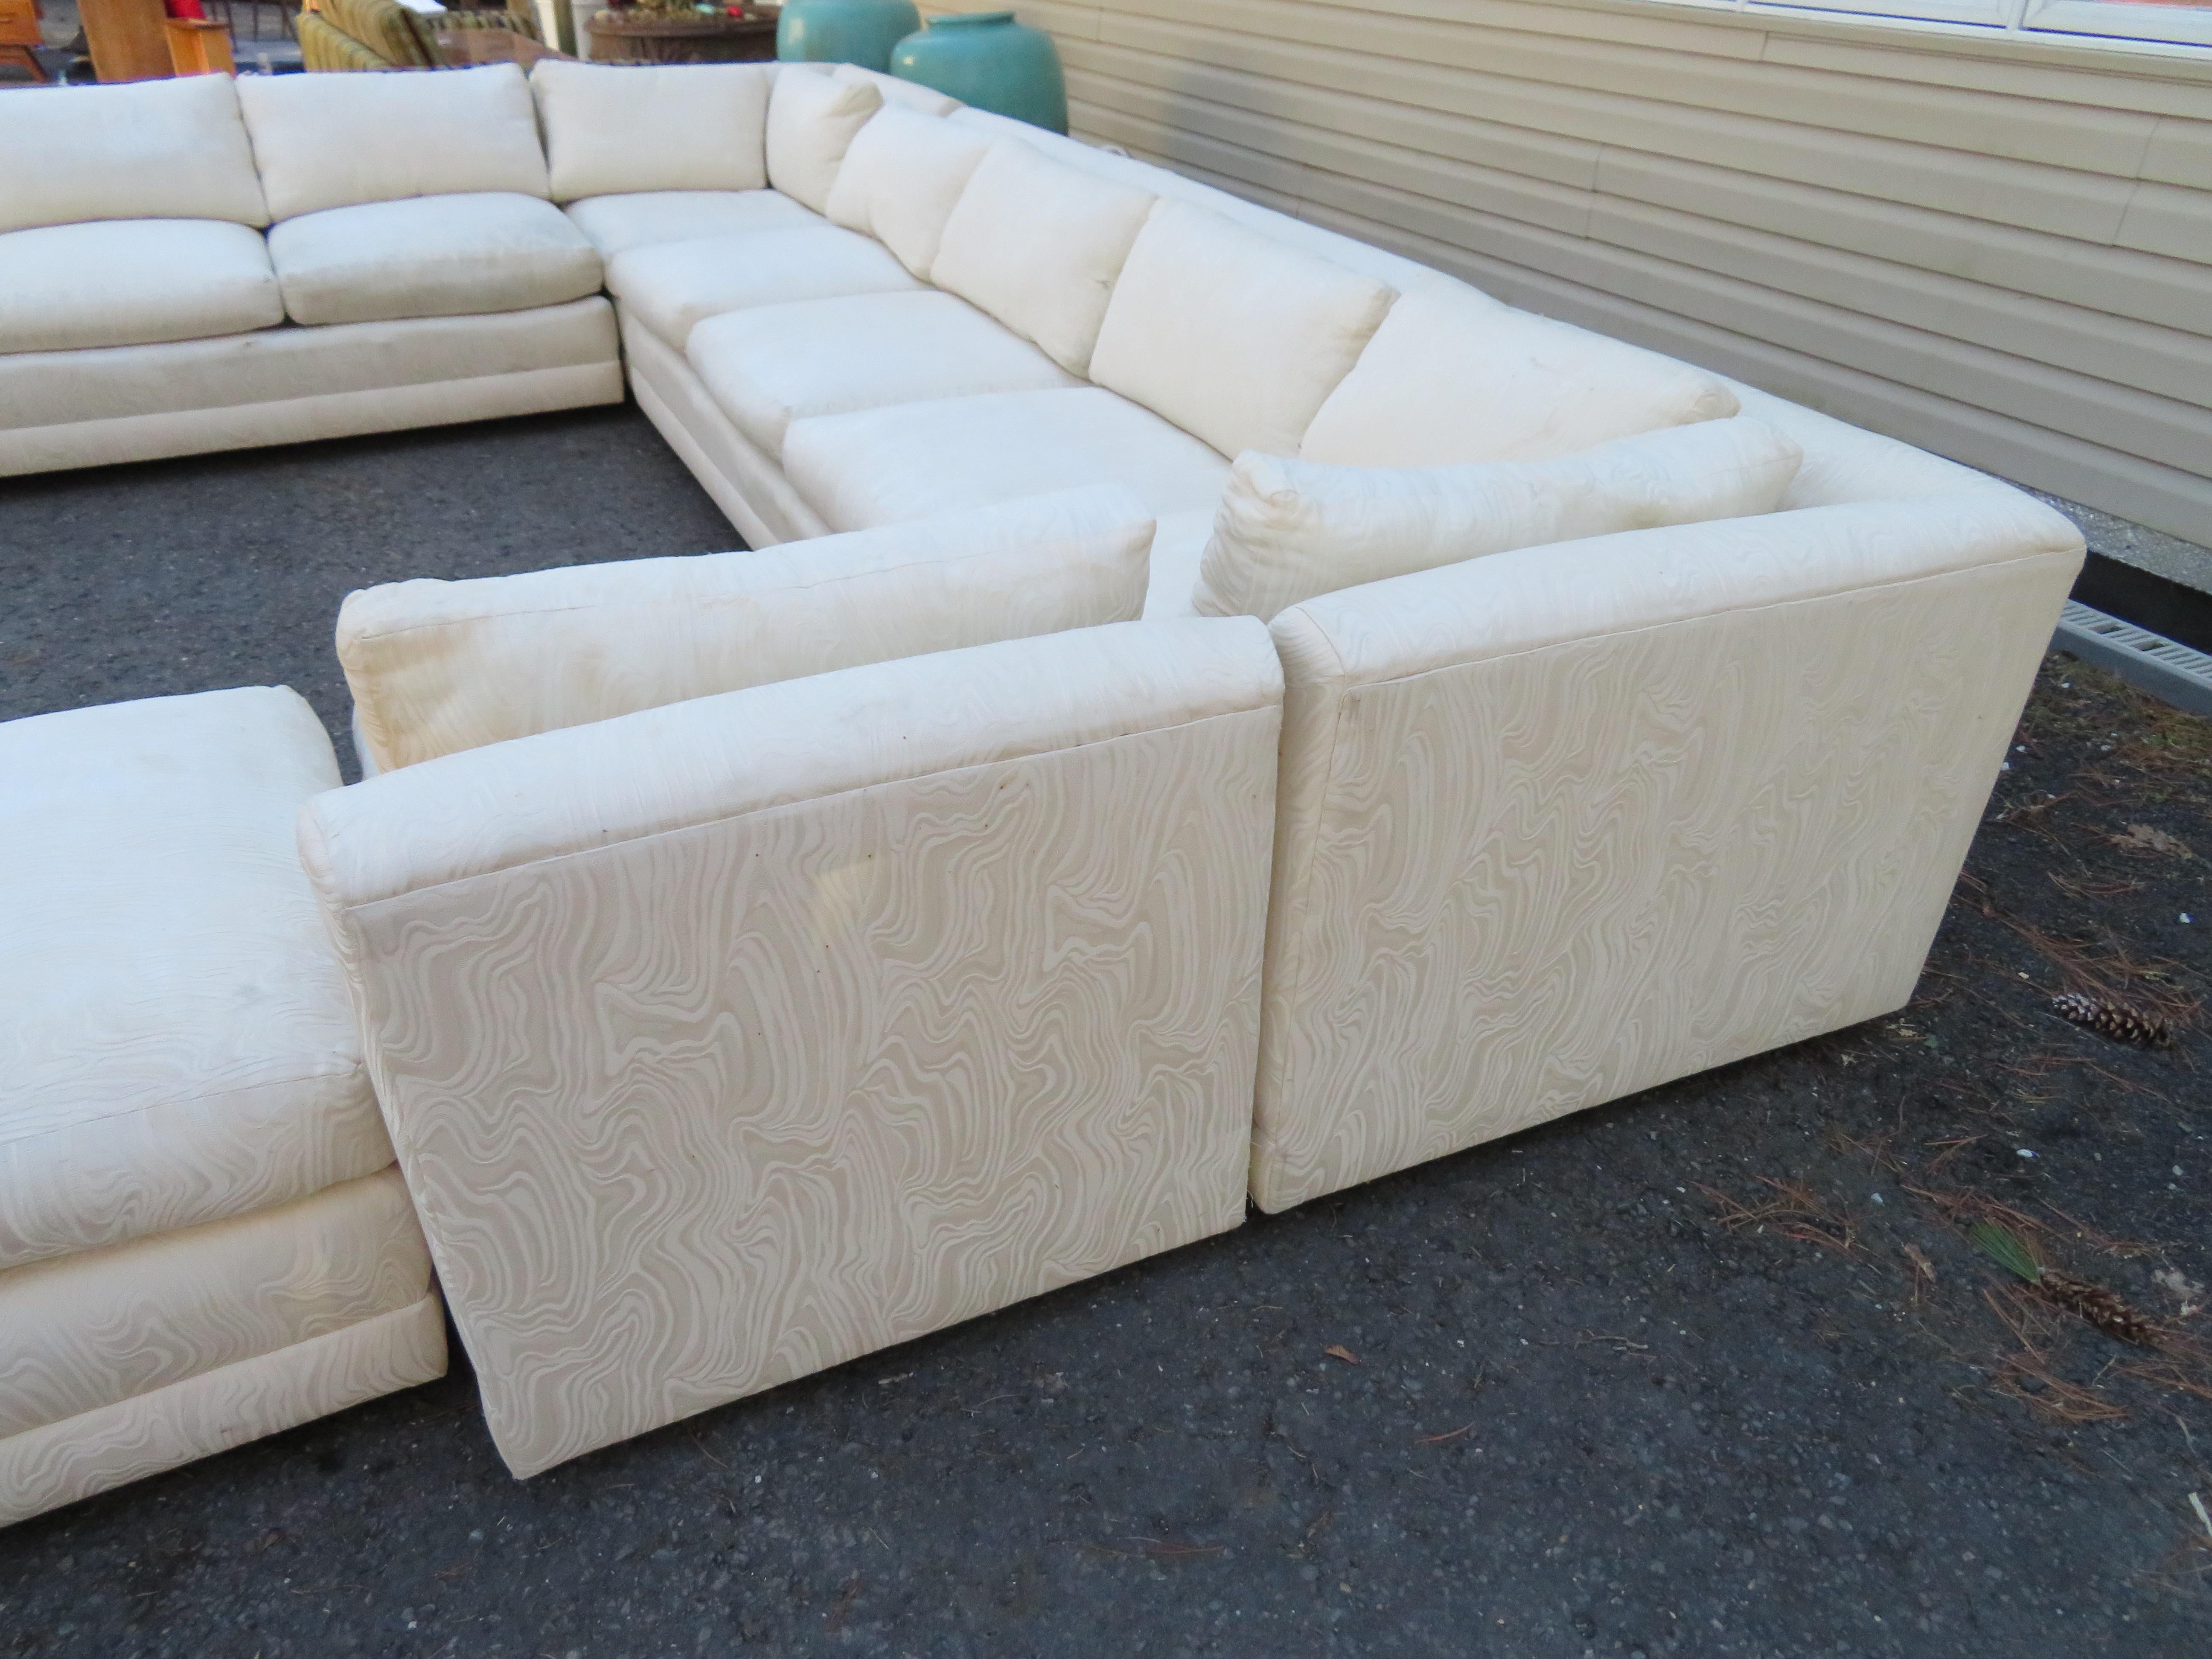 Upholstery Handsome 6 Piece Milo Baughman Directional Sectional Sofa Mid-Century Modern